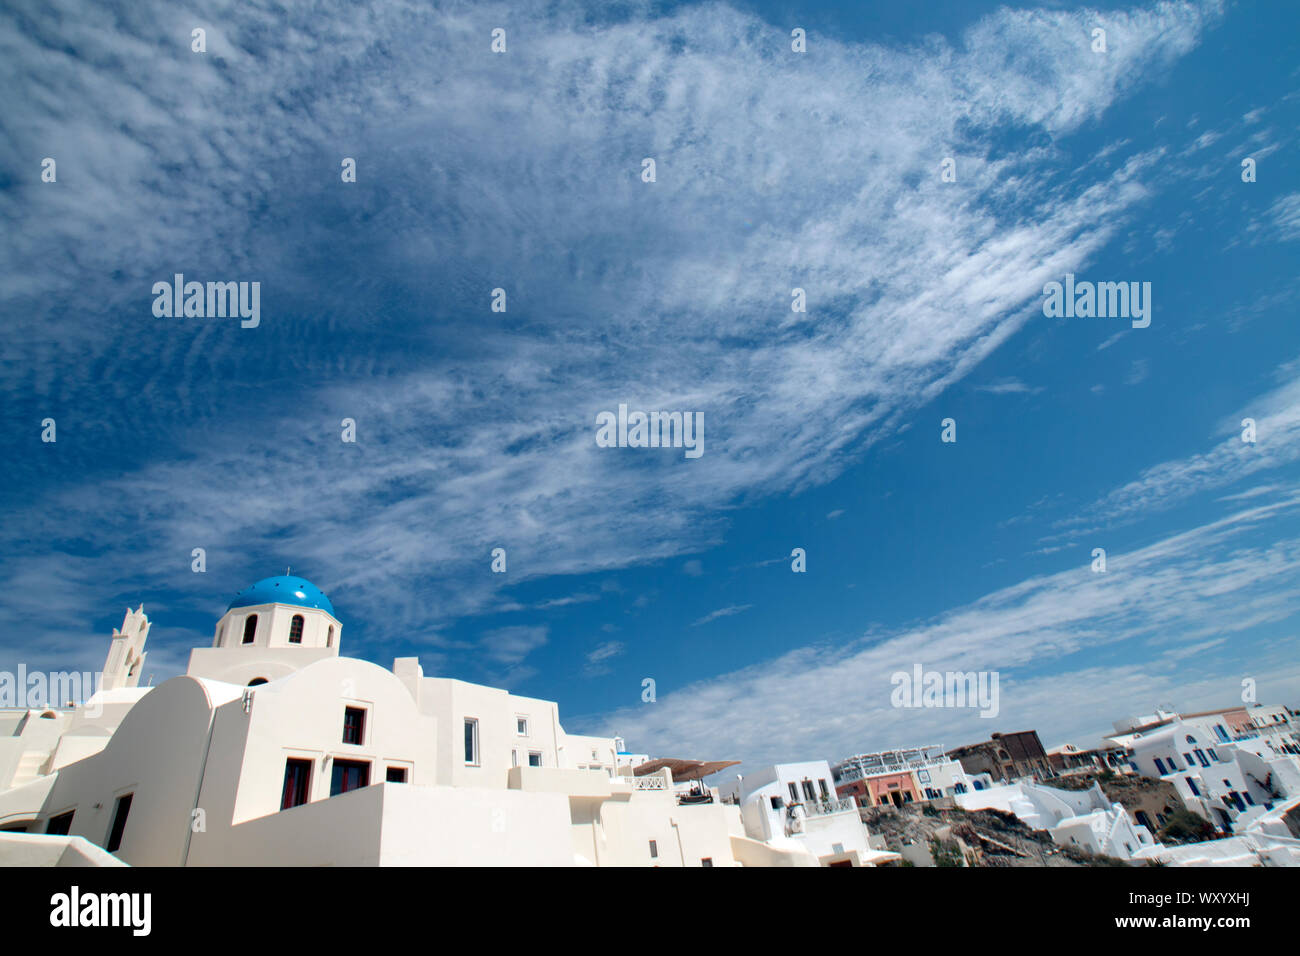 Looking to the sky over the whitewashed buildings with blue roofs on the Greek Island of Santorini Stock Photo